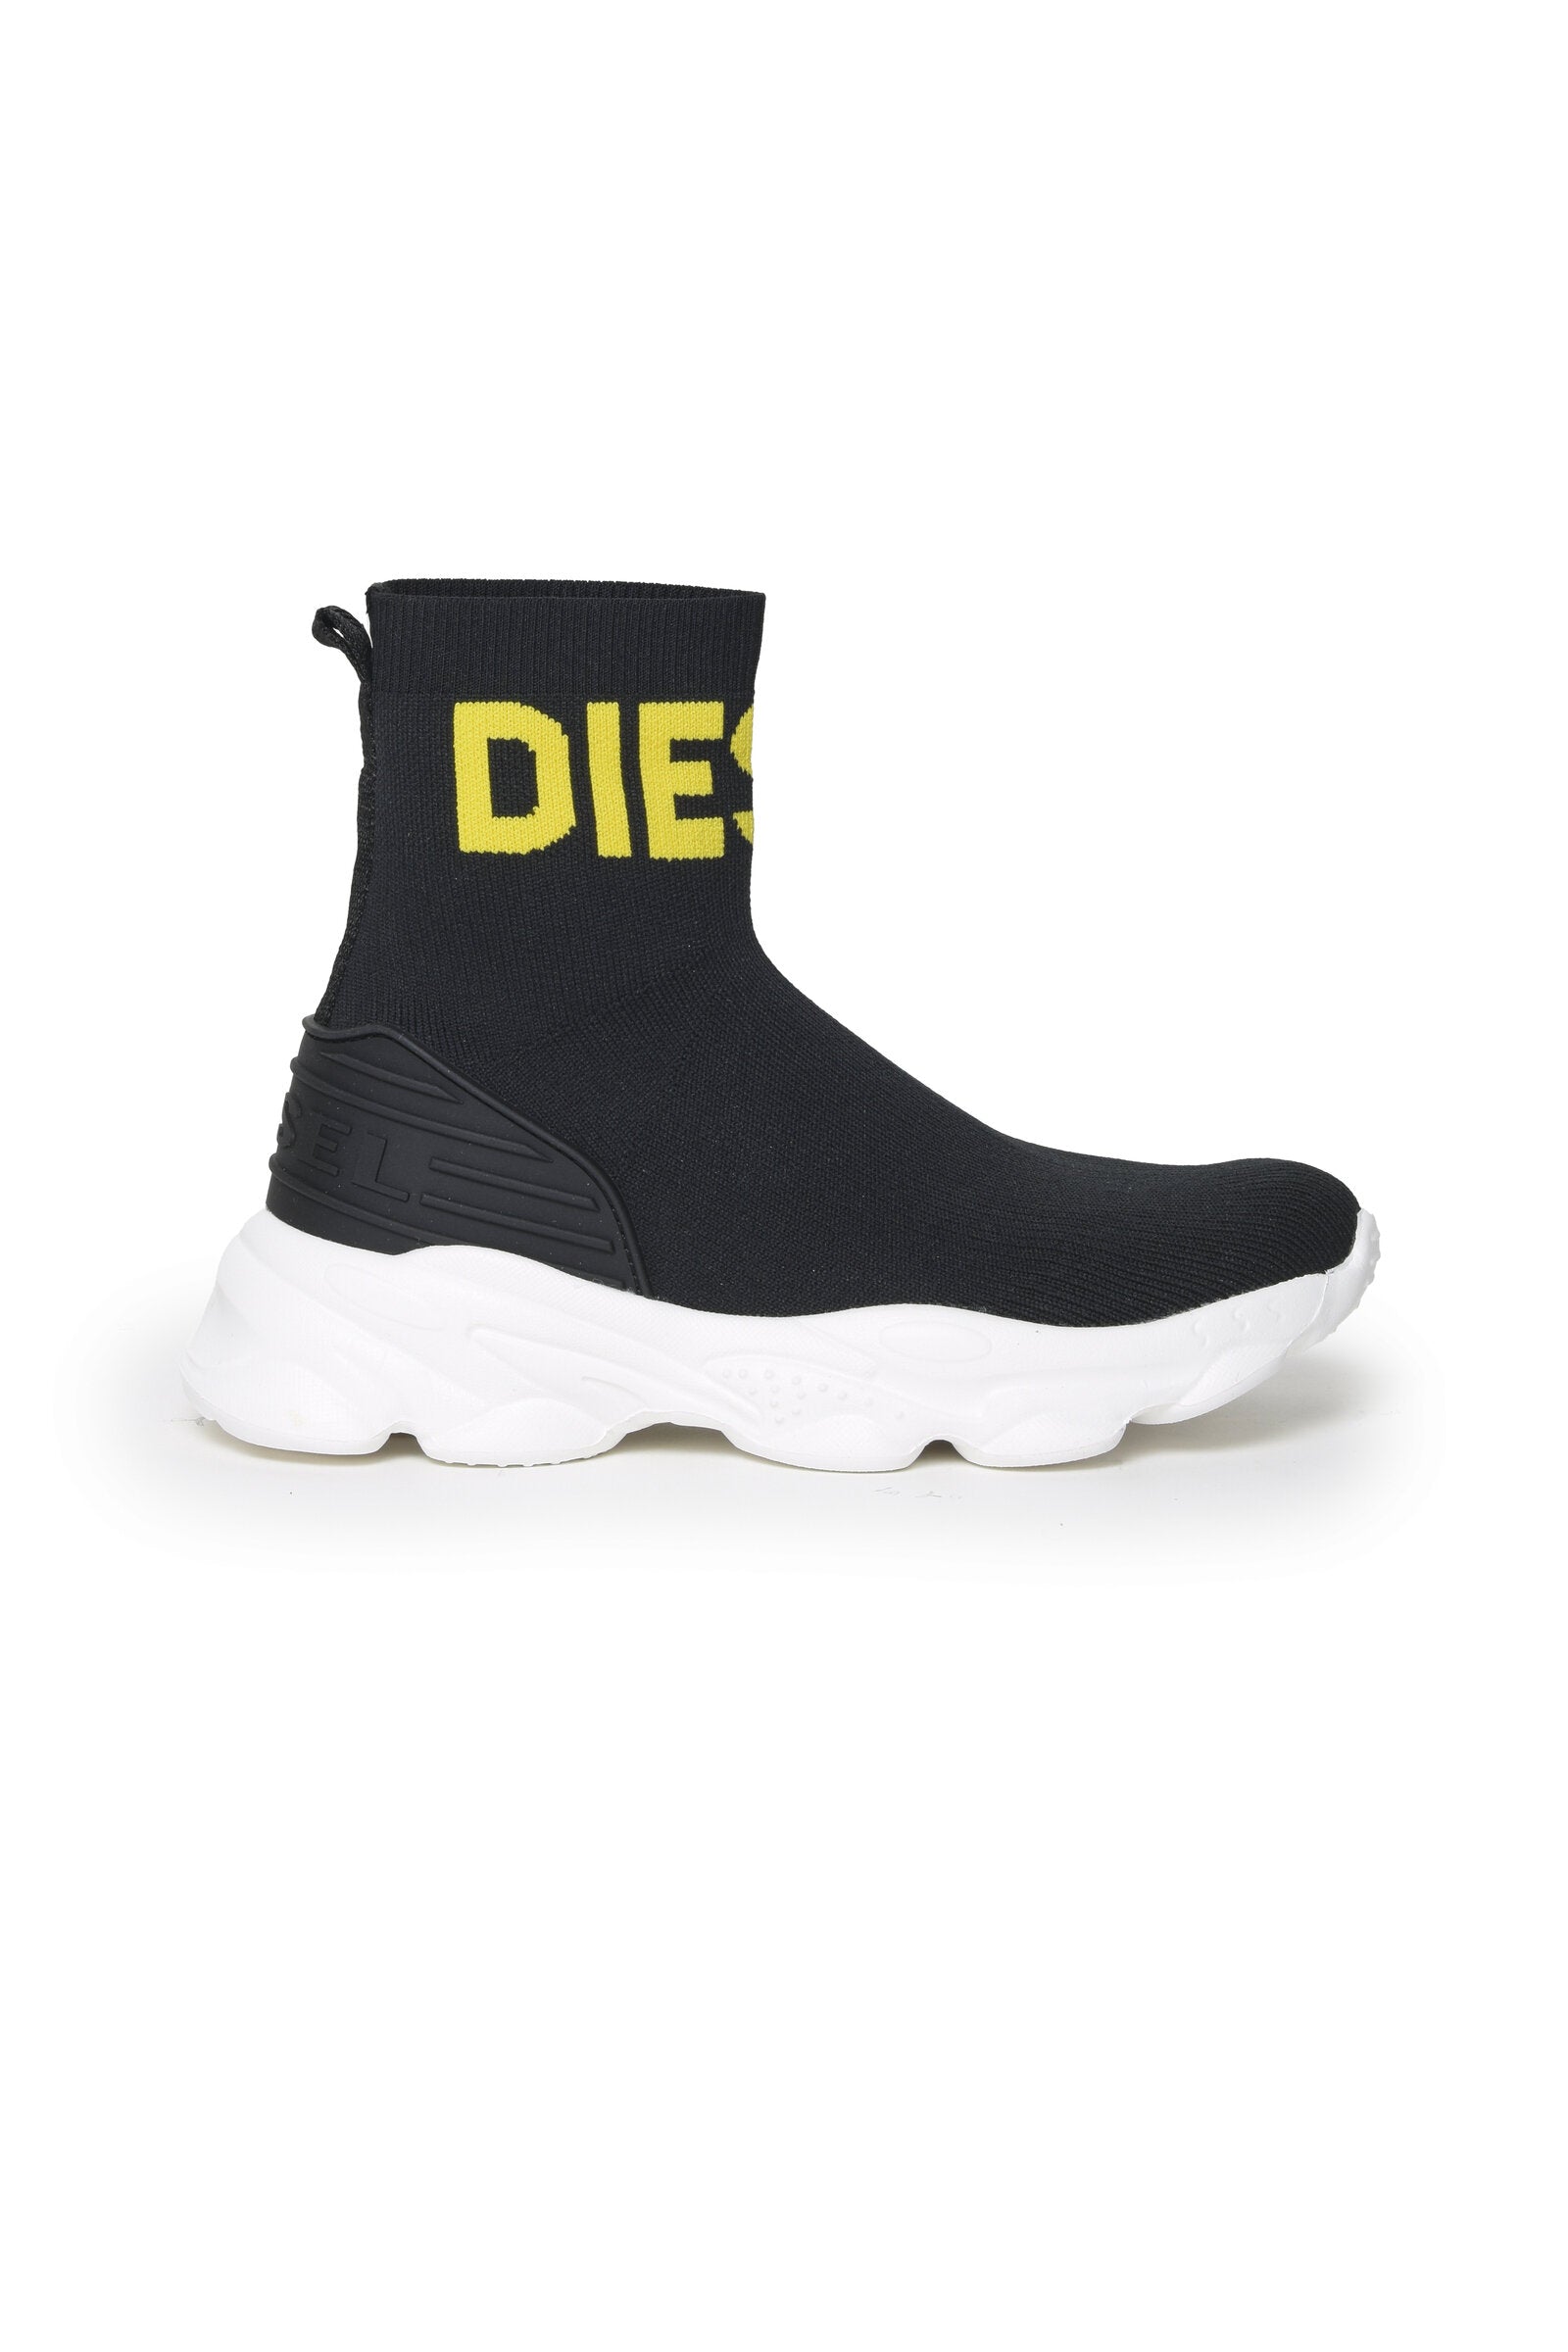 Serendipity black high sock sneakers with yellow logo